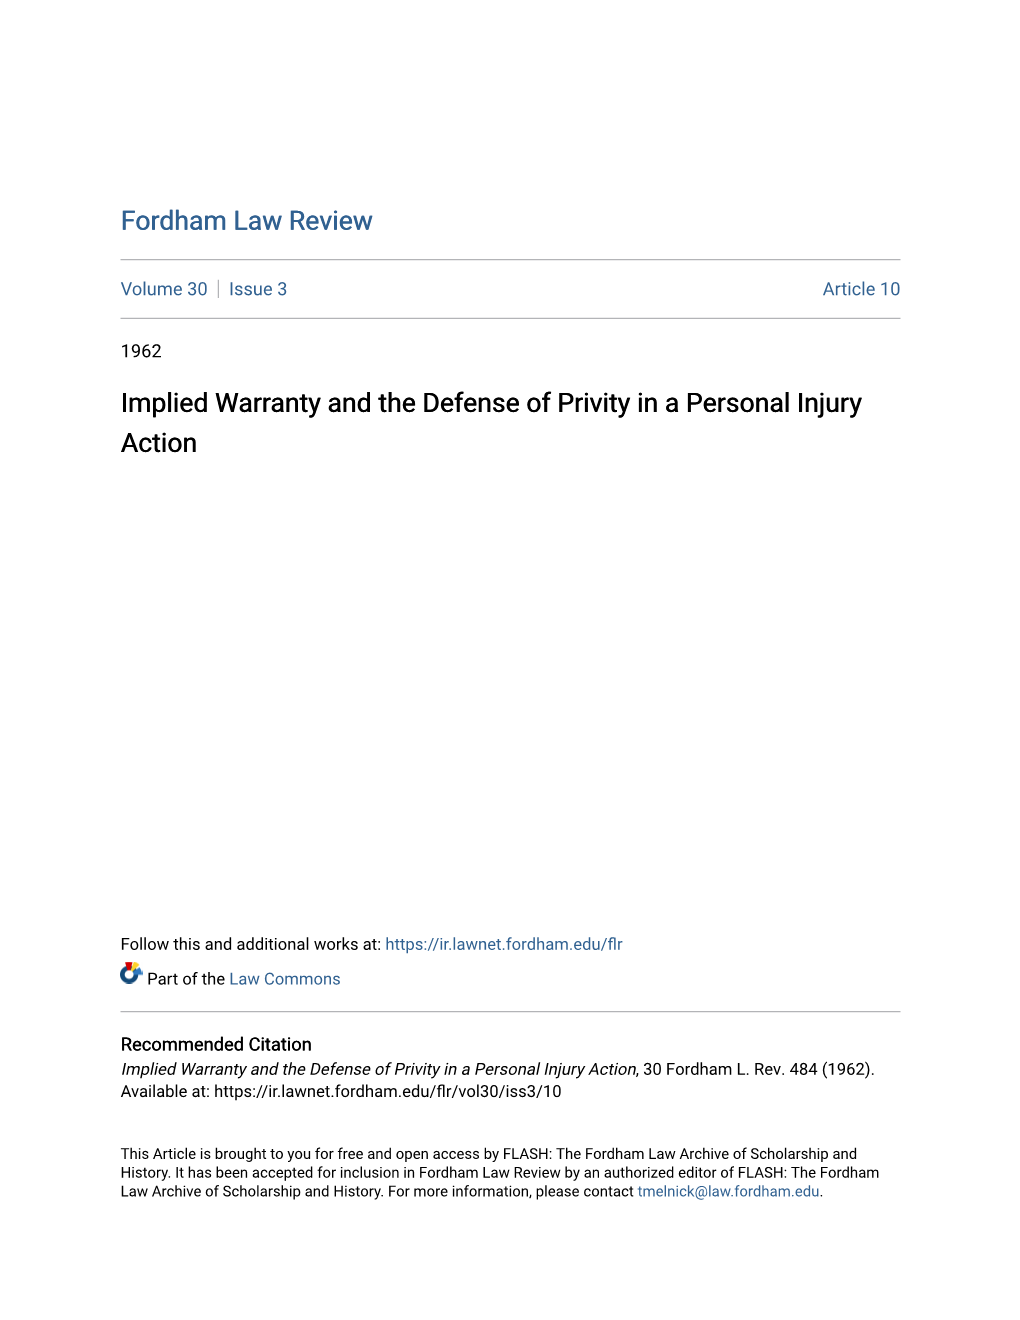 Implied Warranty and the Defense of Privity in a Personal Injury Action